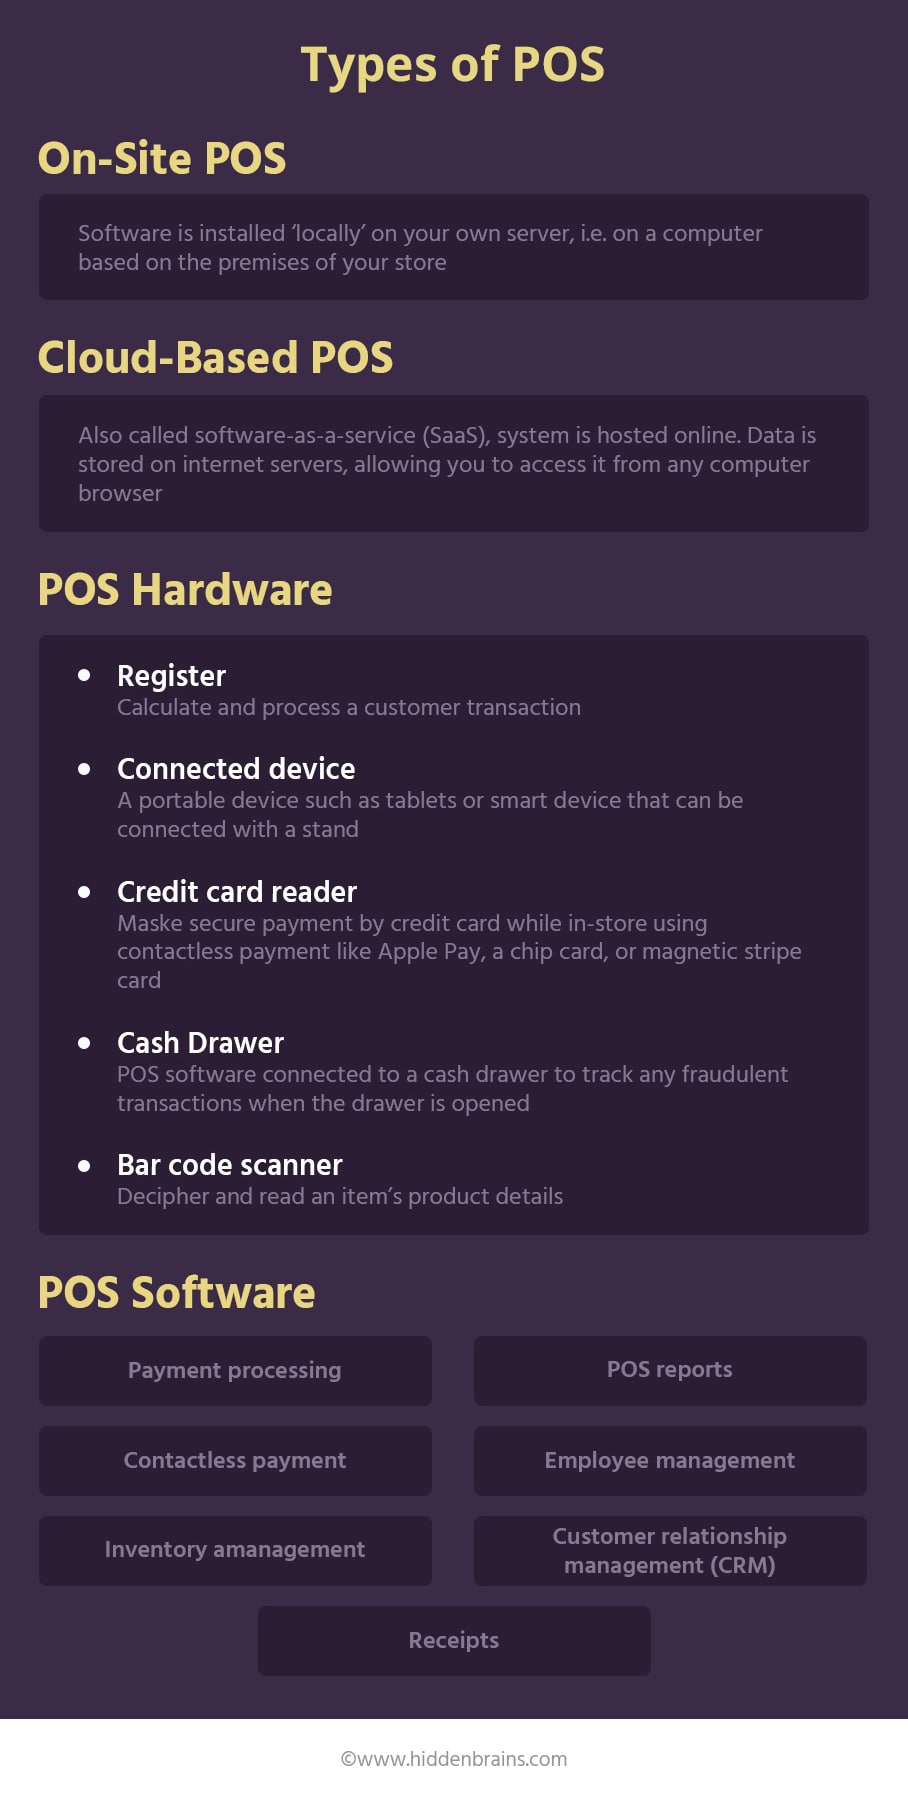 Types of POS Software